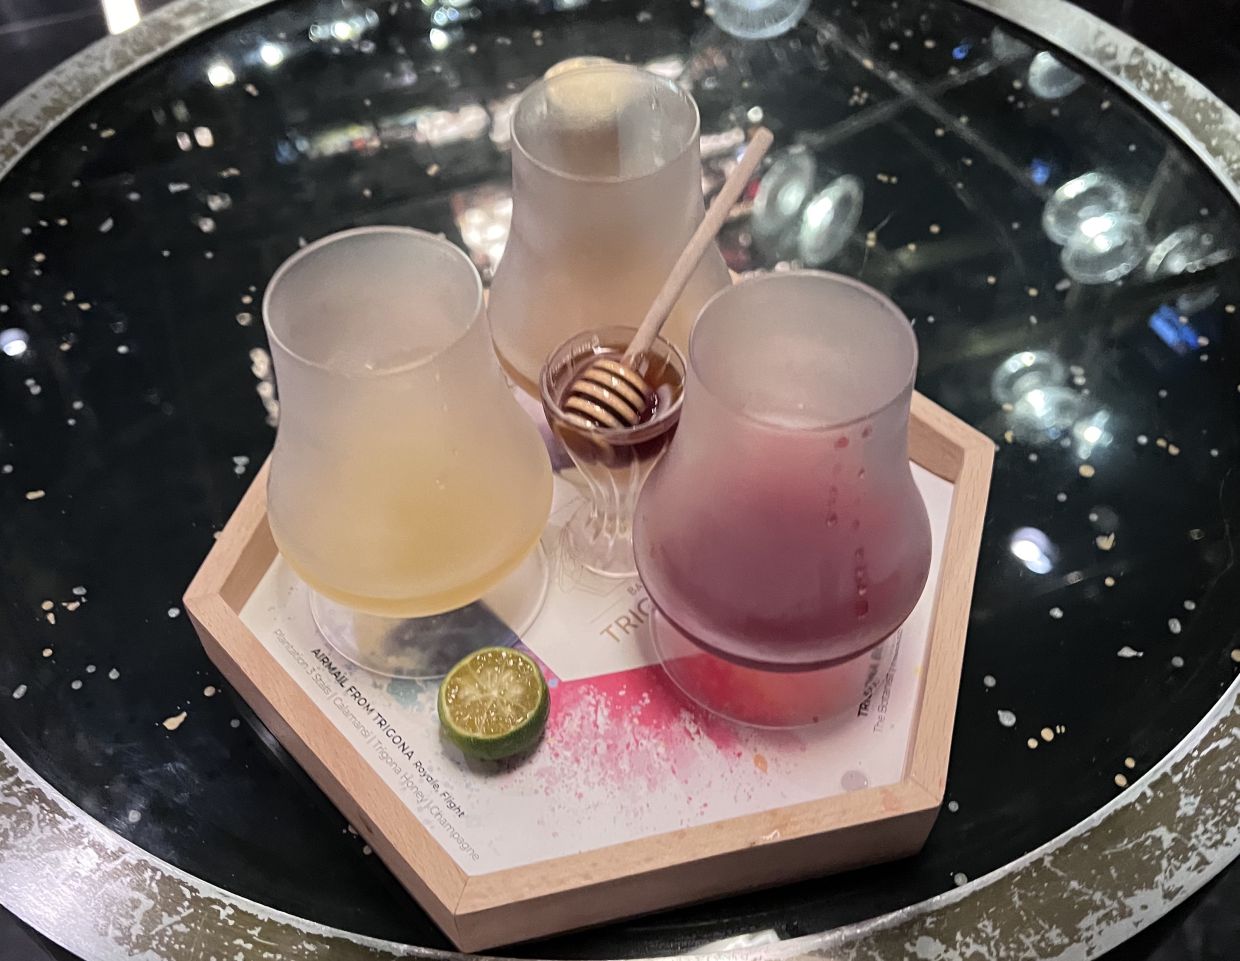 You can have the three drinks in the Trigona Honey Flight as a set of three tasters or in a single serving.